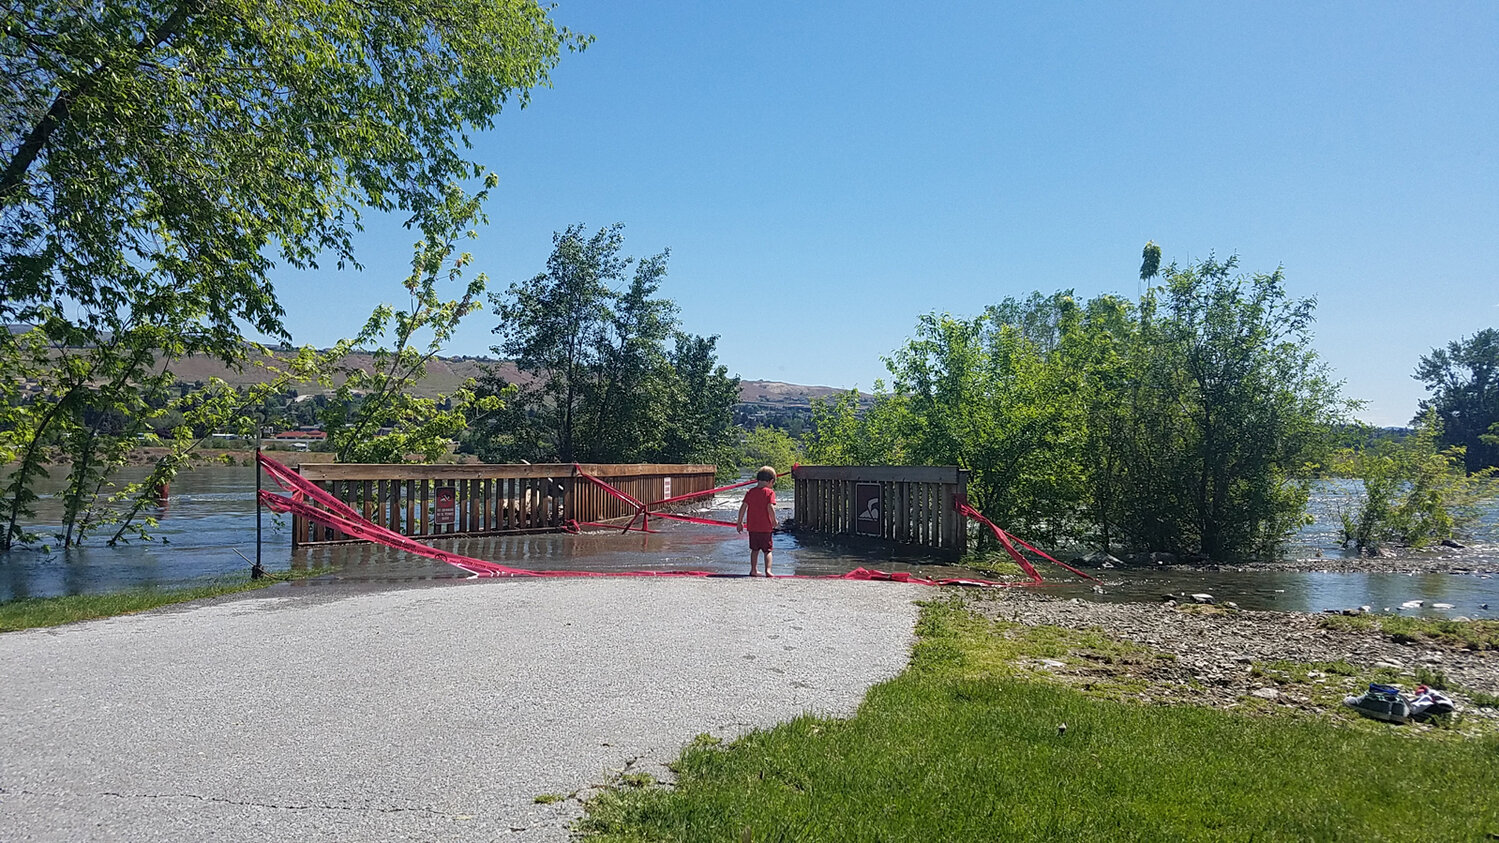 All Chelan PUD boat launches on Rock Island and Rocky Reach reservoirs are closed. Remember to watch small children closely when recreating on the Columbia River and on Lake Chelan. - Photo courtesy of the Chelan County PUD